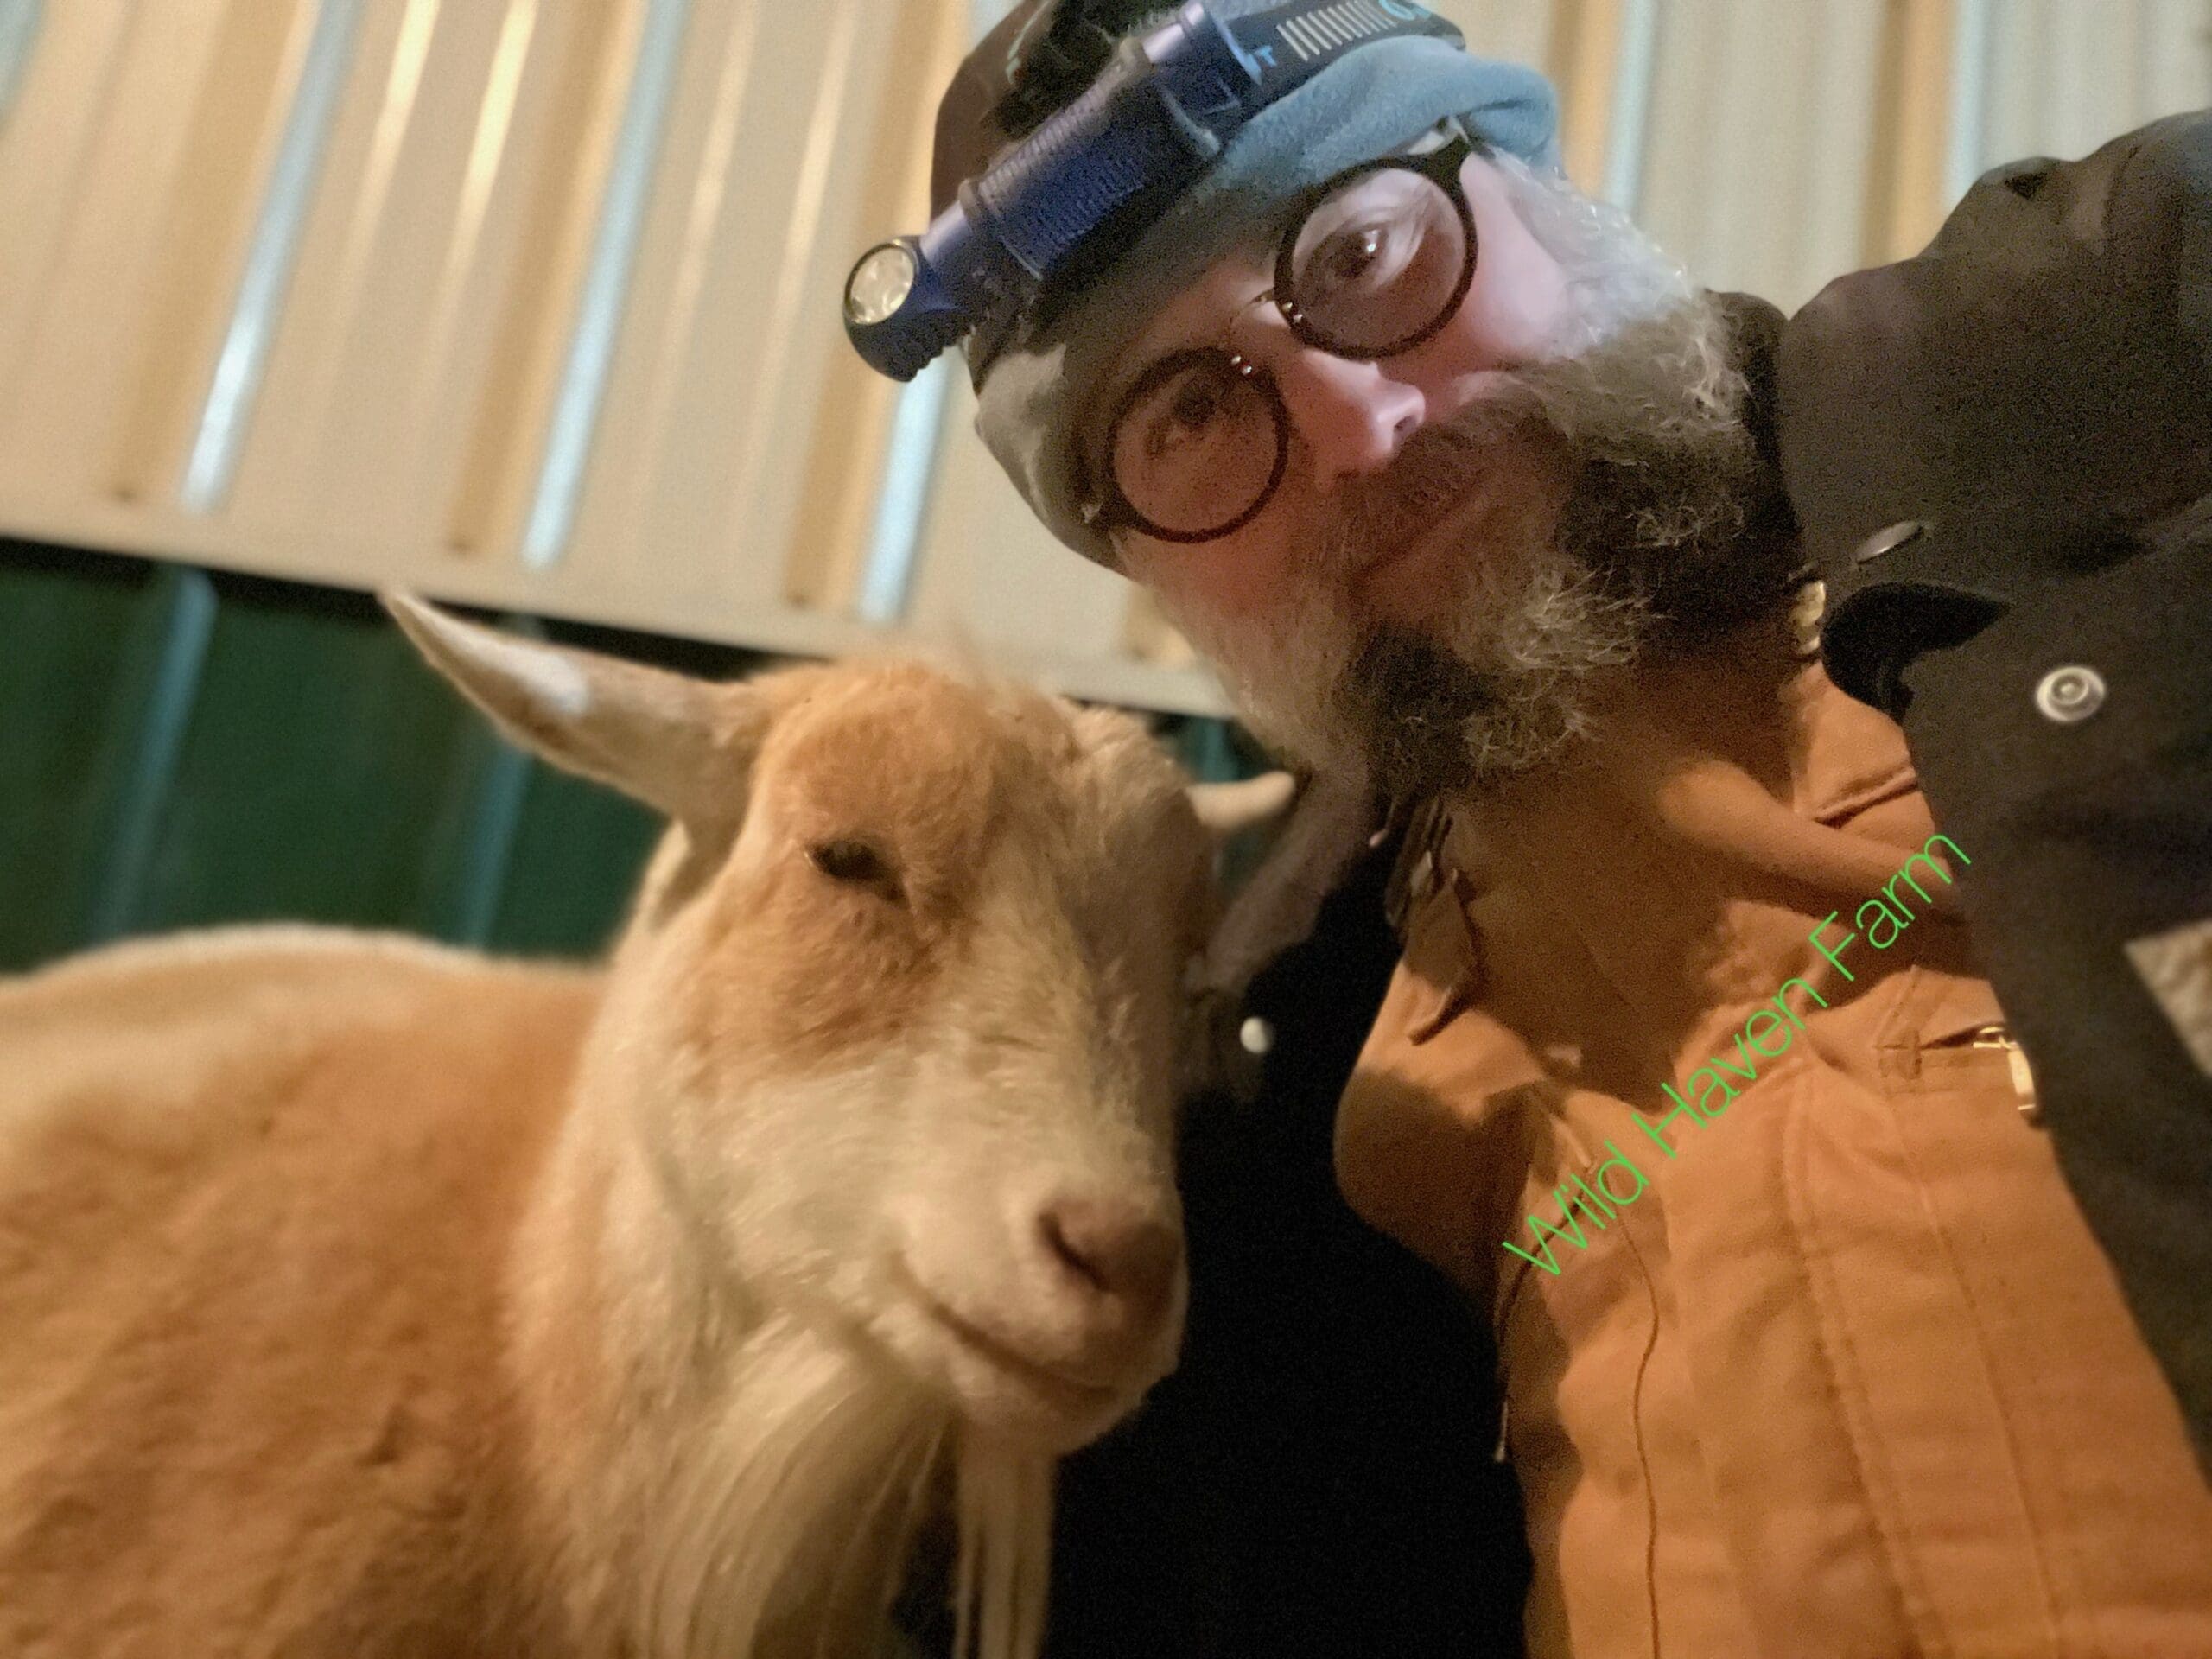 Man and goat taking selfie